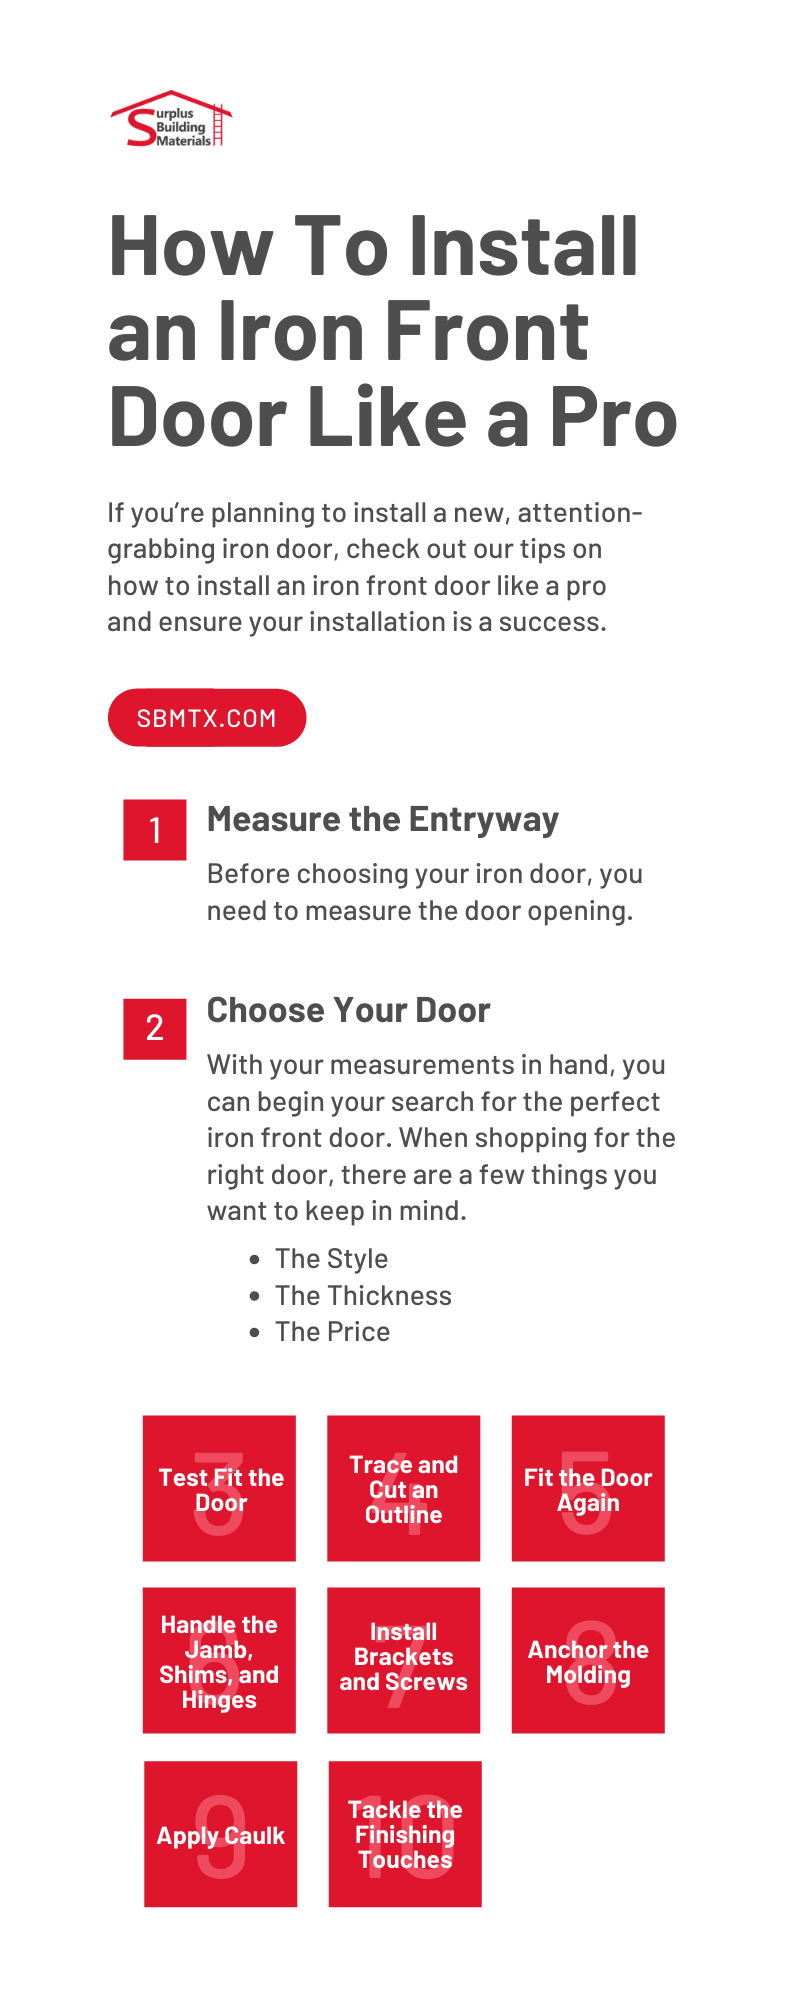 How To Install an Iron Front Door Like a Pro